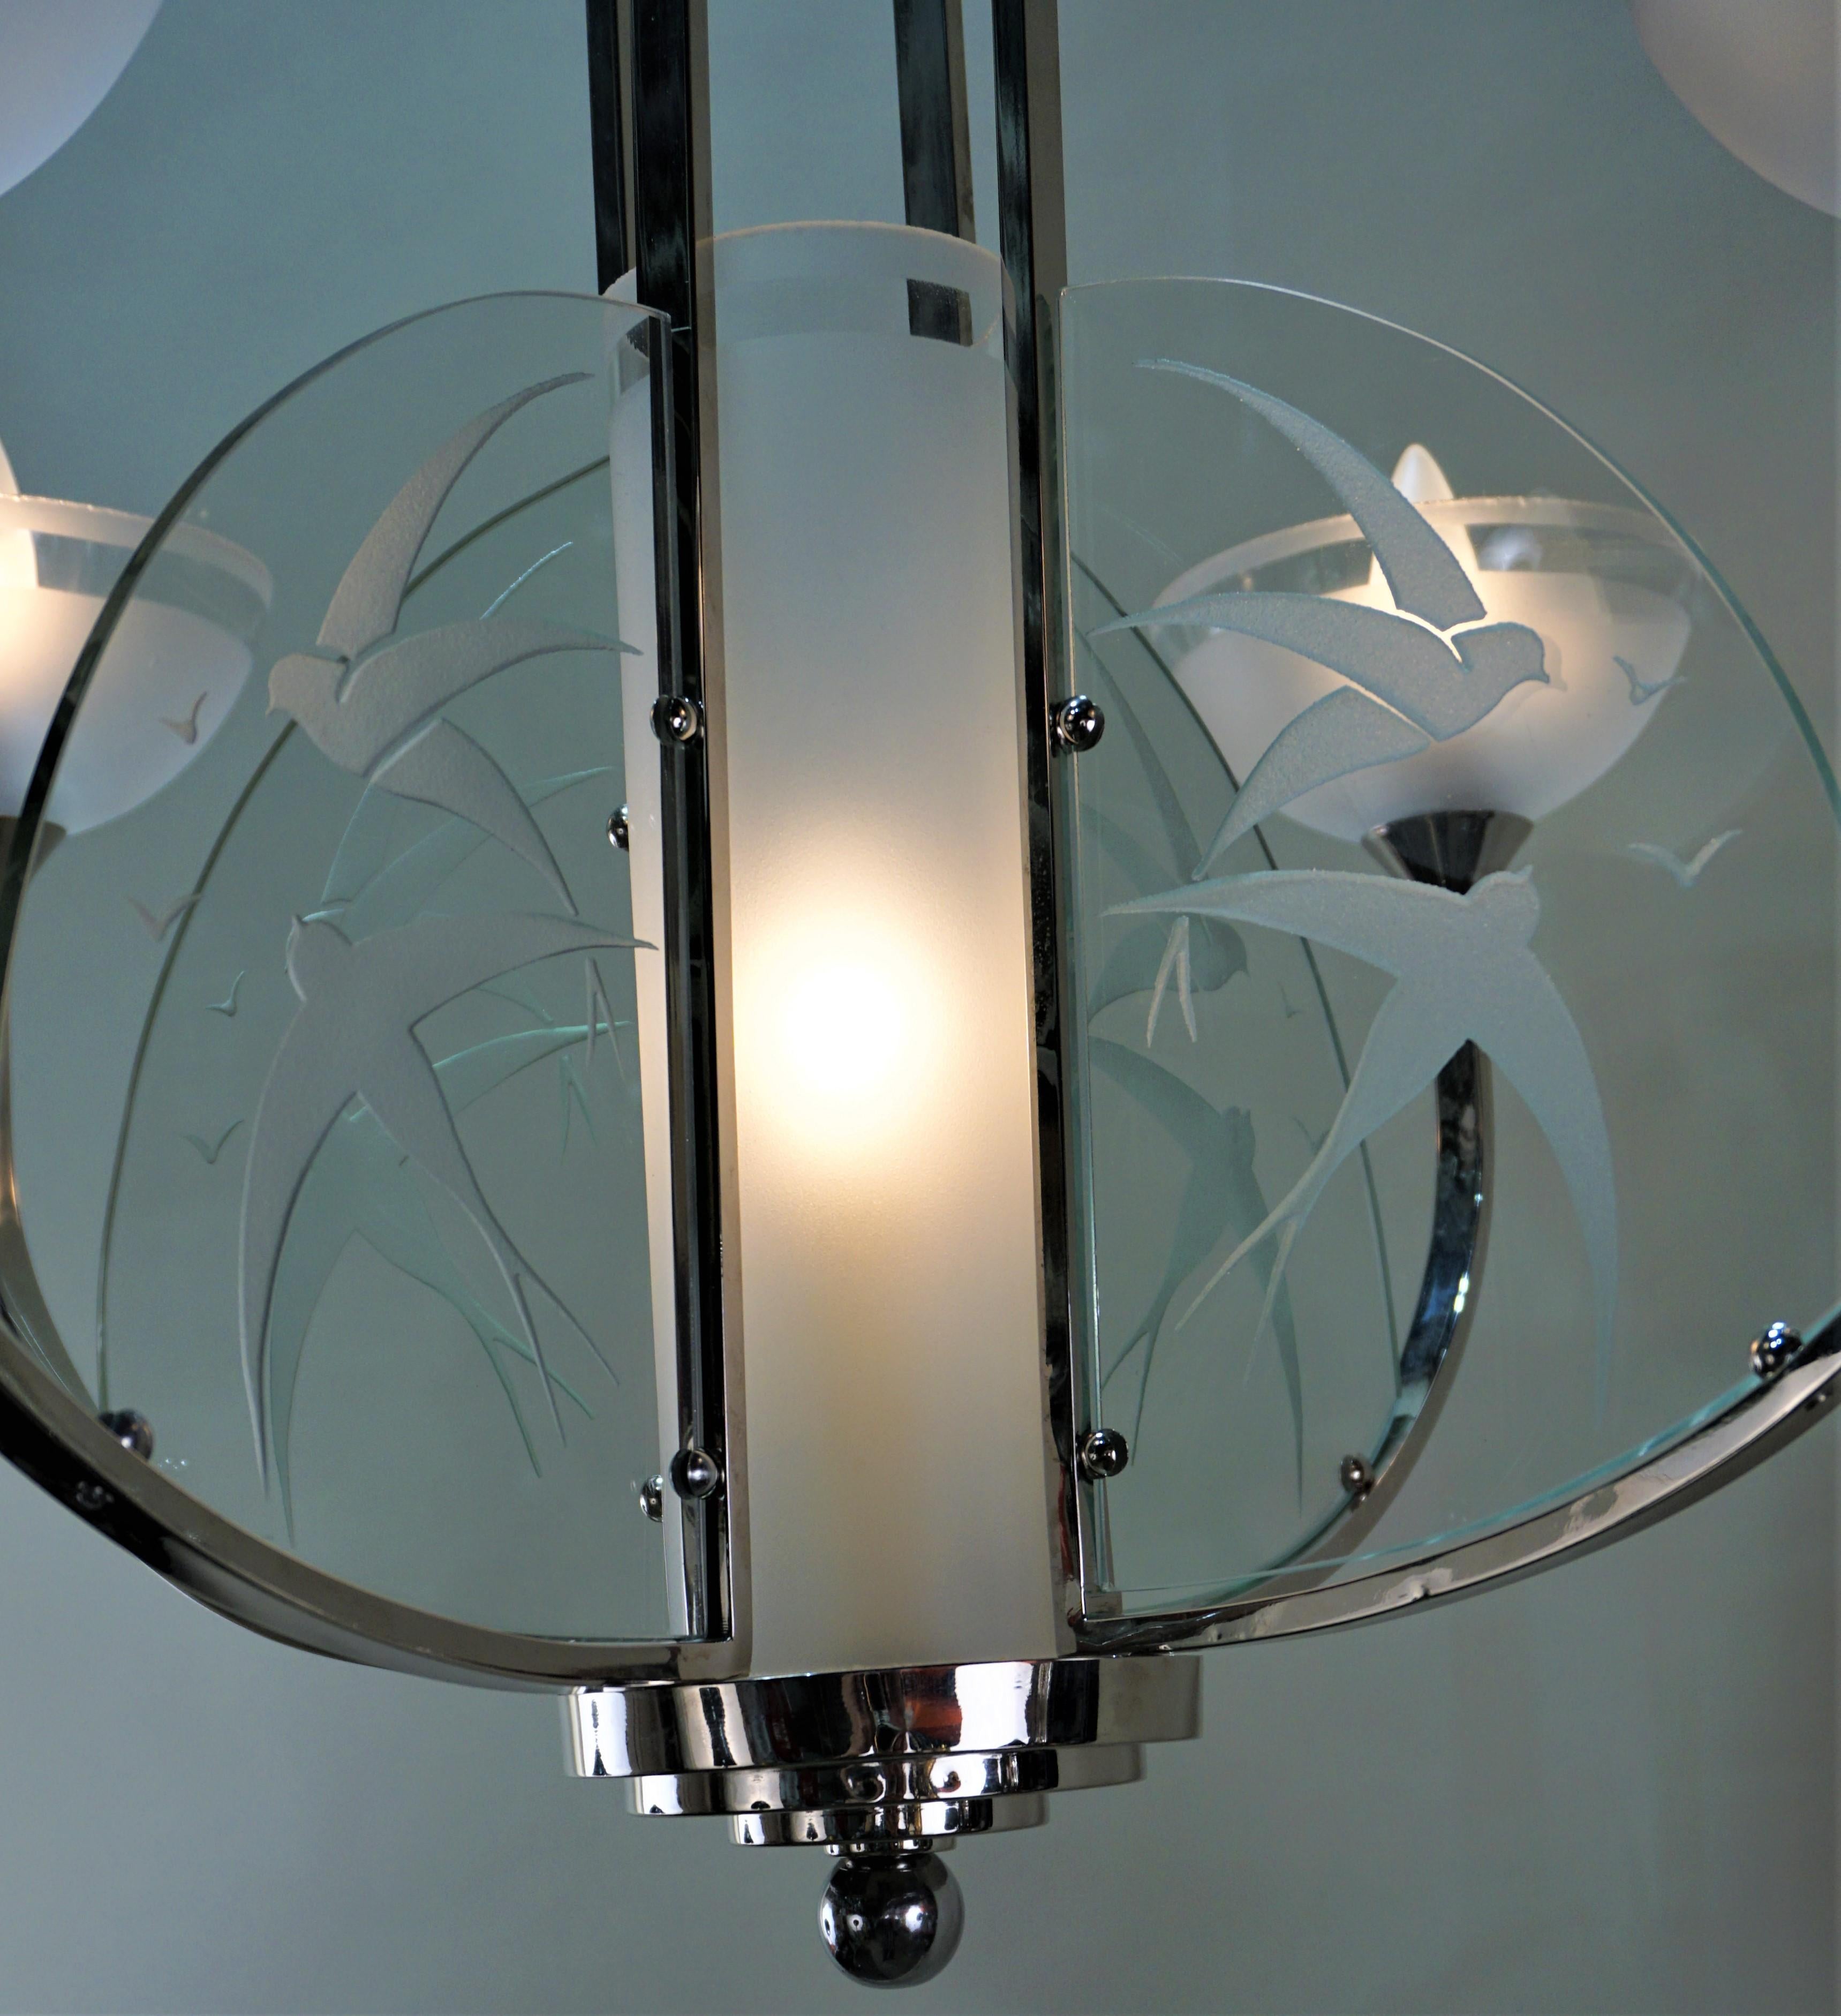 Mid-20th Century French 1930s Art Deco Chandelier